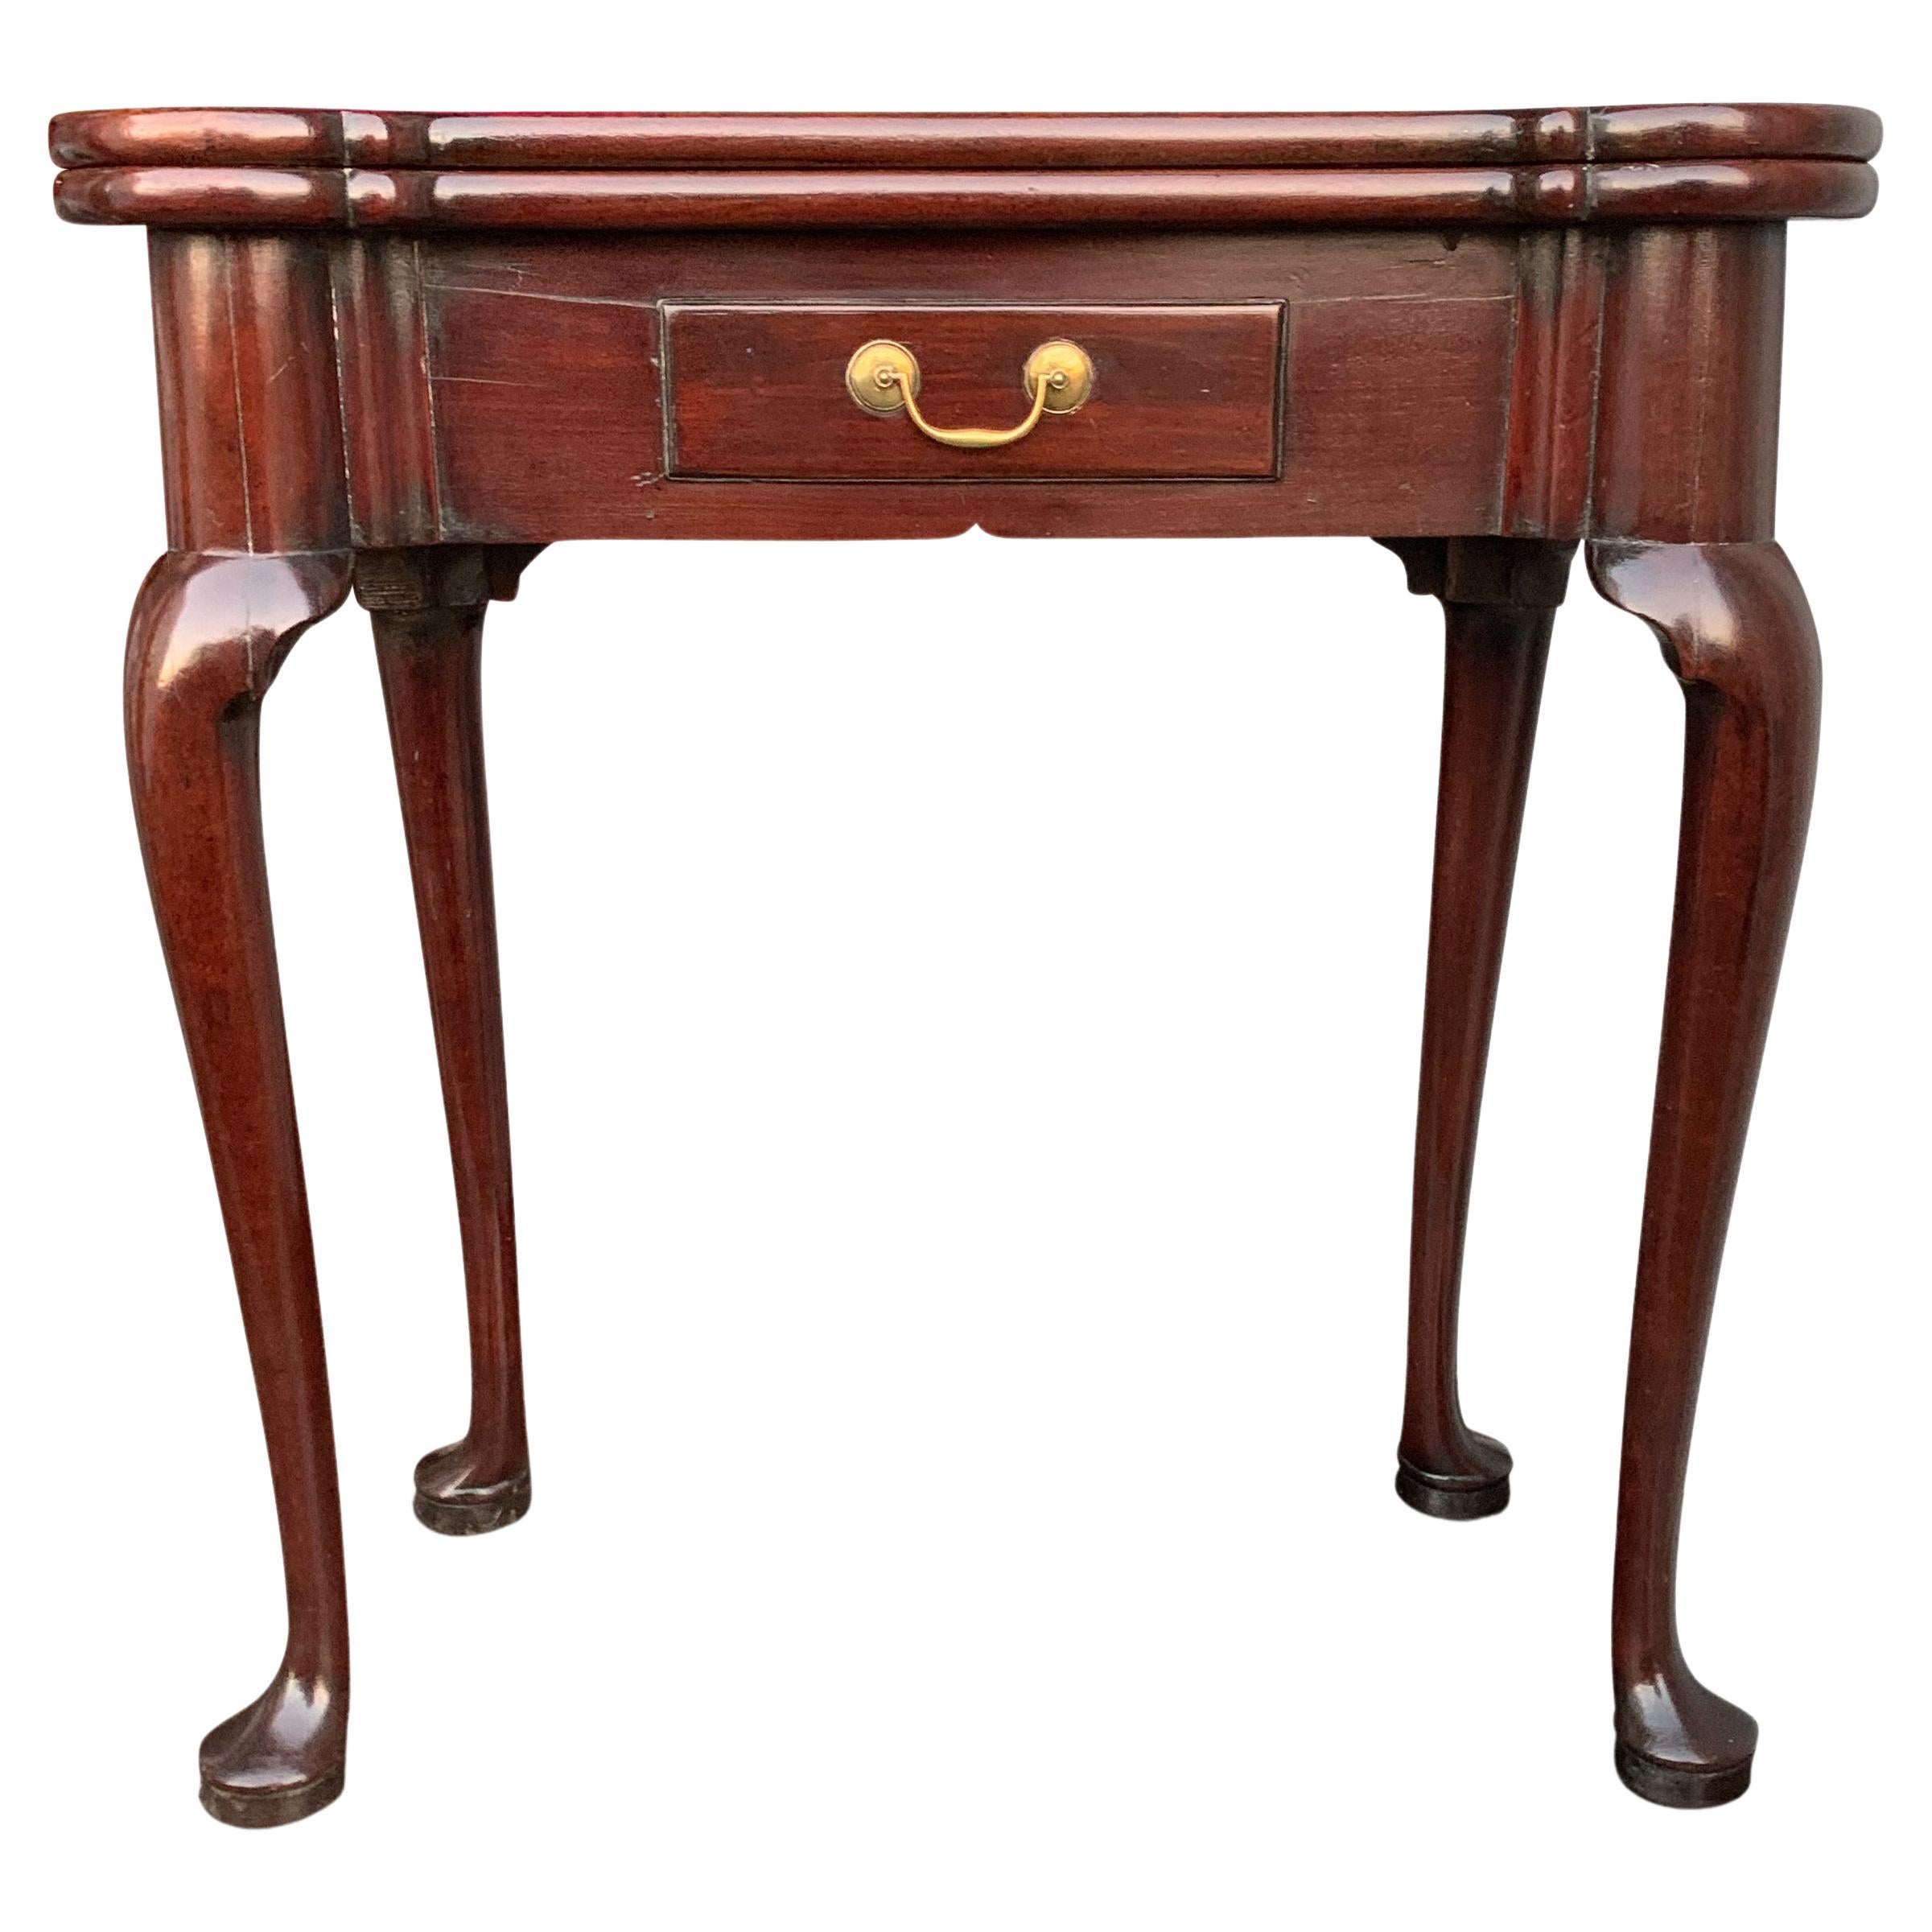 British 18th Century Exquisite George II Polished Mahogany Fold-Over Tea Table For Sale